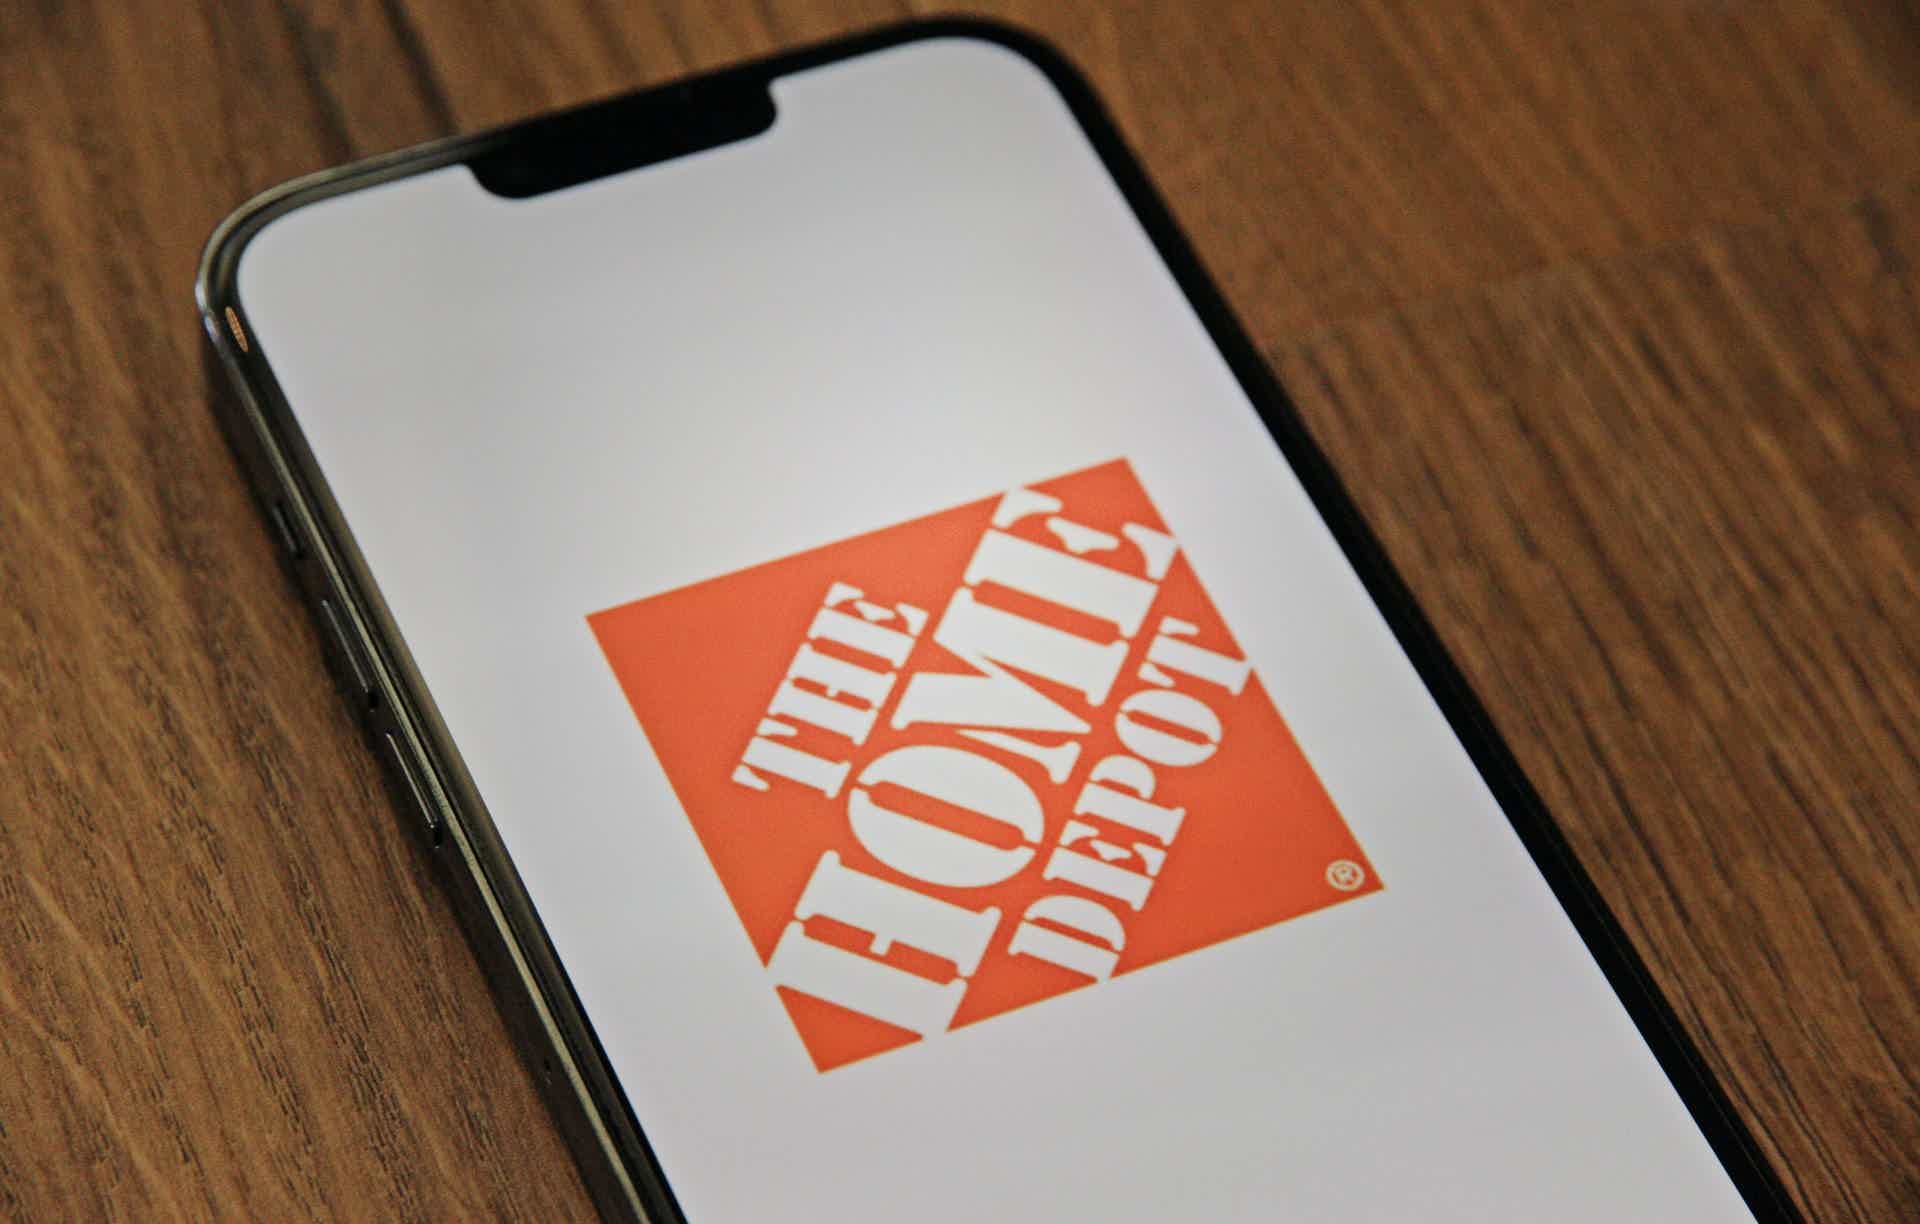 Learn how to apply for a Home Depot® Consumer card online. Source: Unsplash.